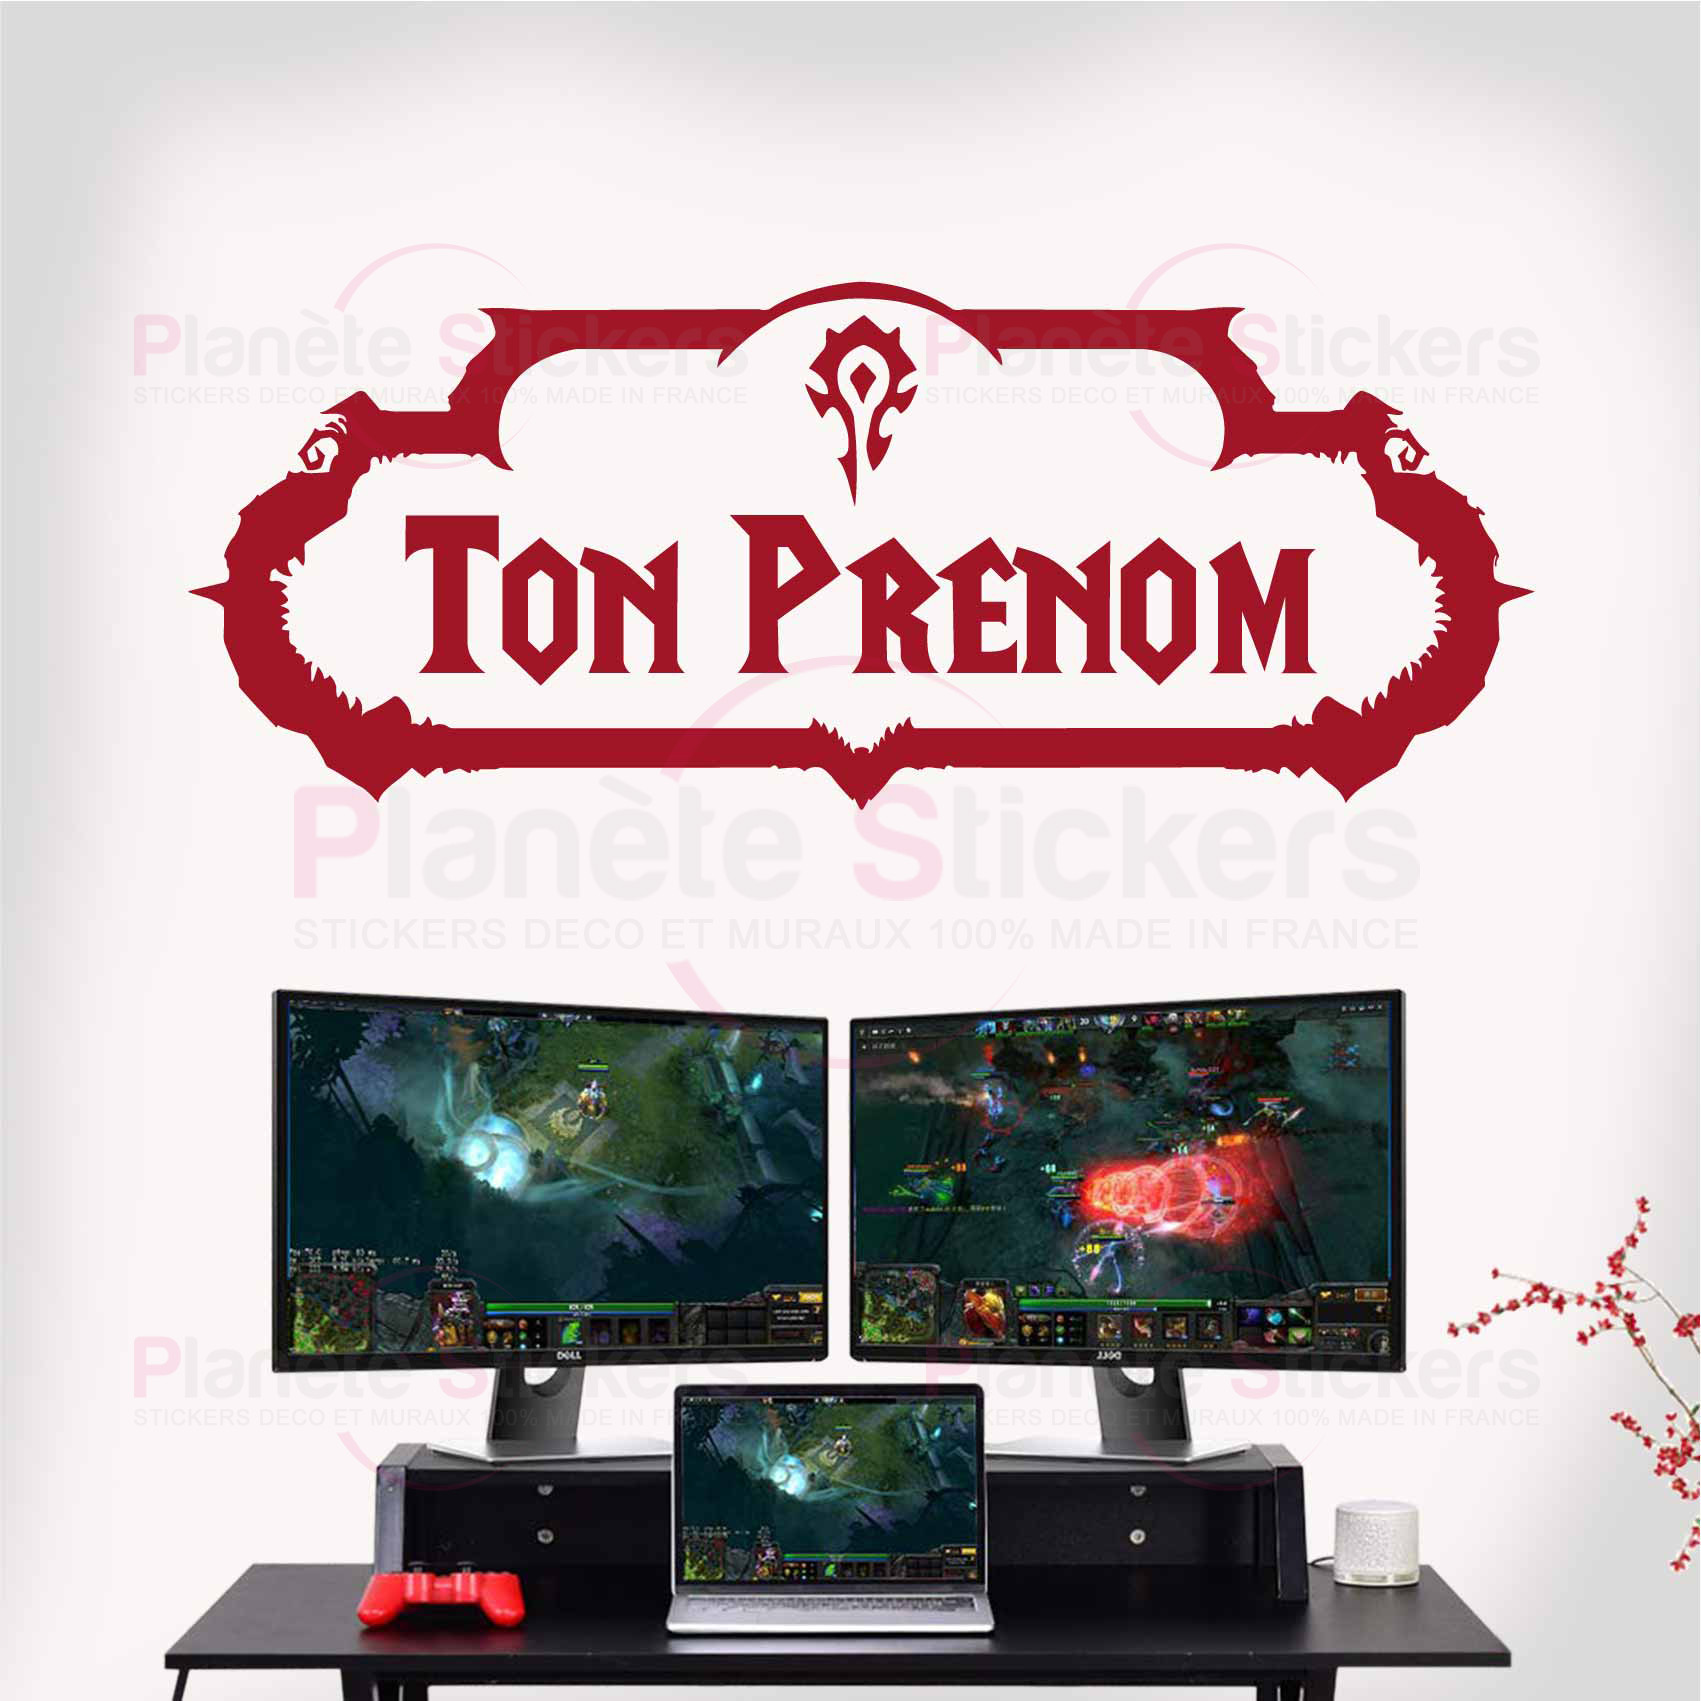 stickers-horde-prenom-personnalisé-wow-ref7wow-stickers-muraux-world-of-warcraft-autocollant-mural-jeux-video-sticker-gamer-deco-gaming-salon-chambre